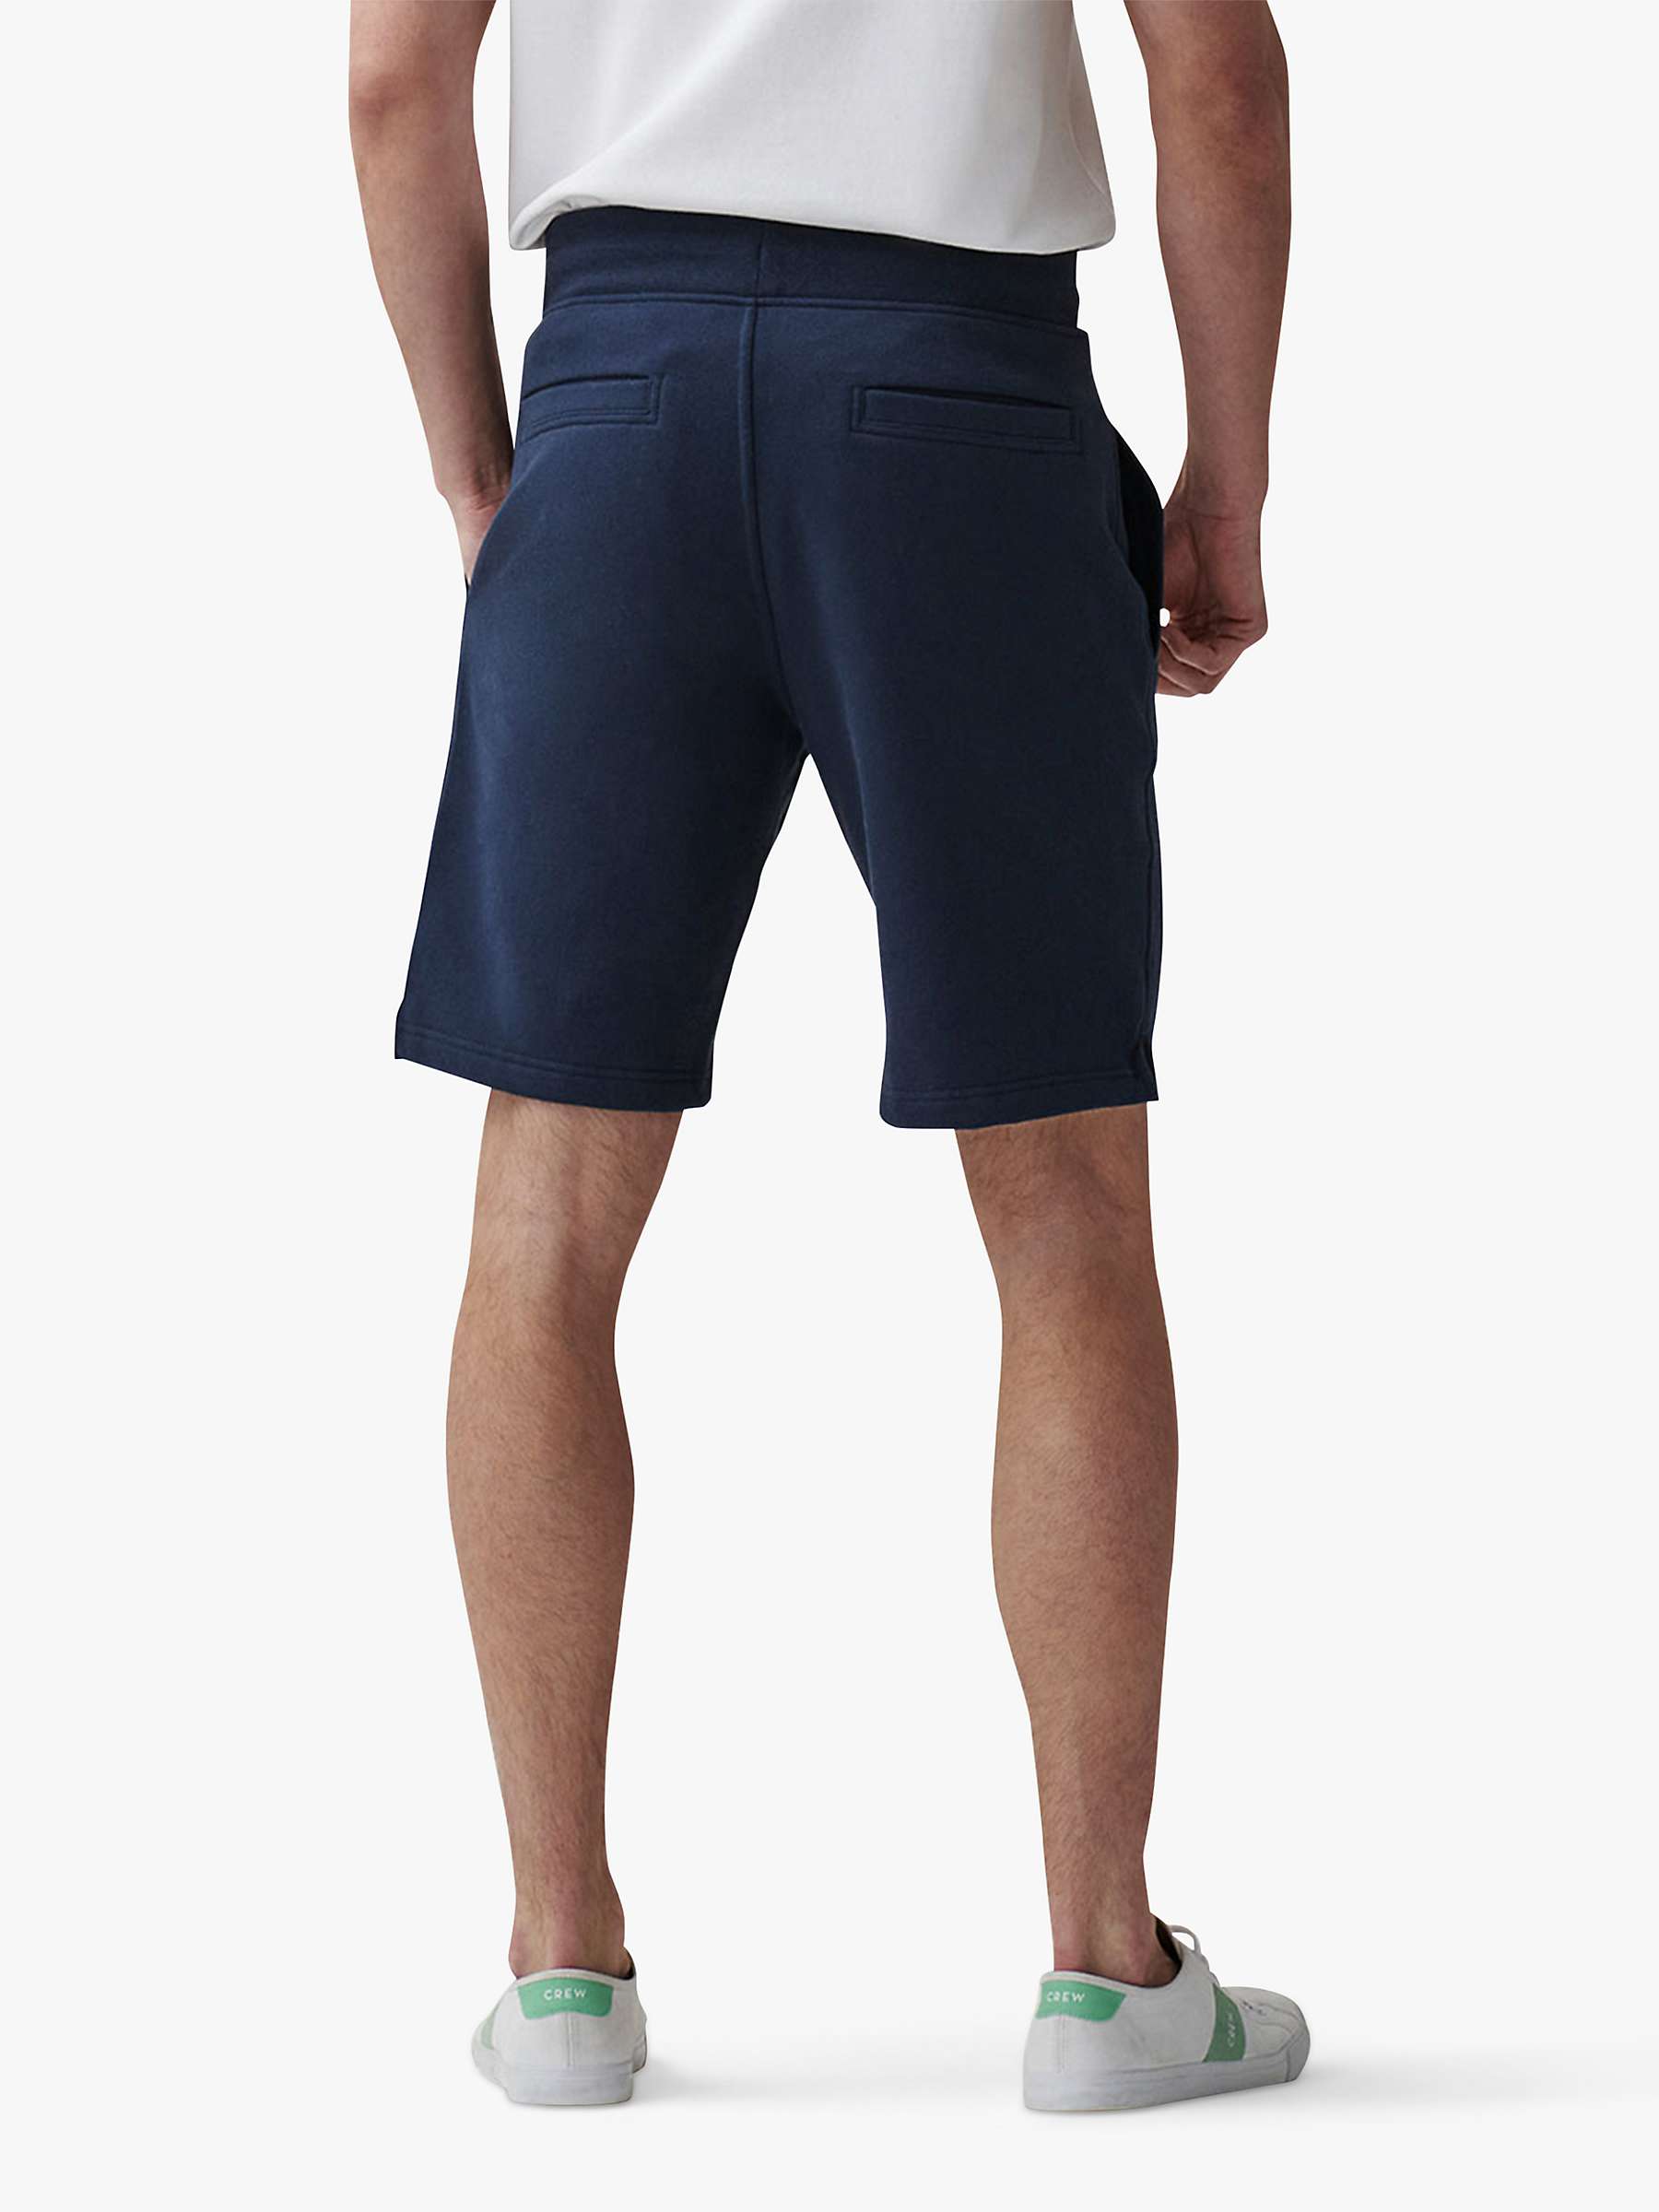 Buy Crew Clothing Crossed Oars Cotton Blend Sweat Shorts Online at johnlewis.com